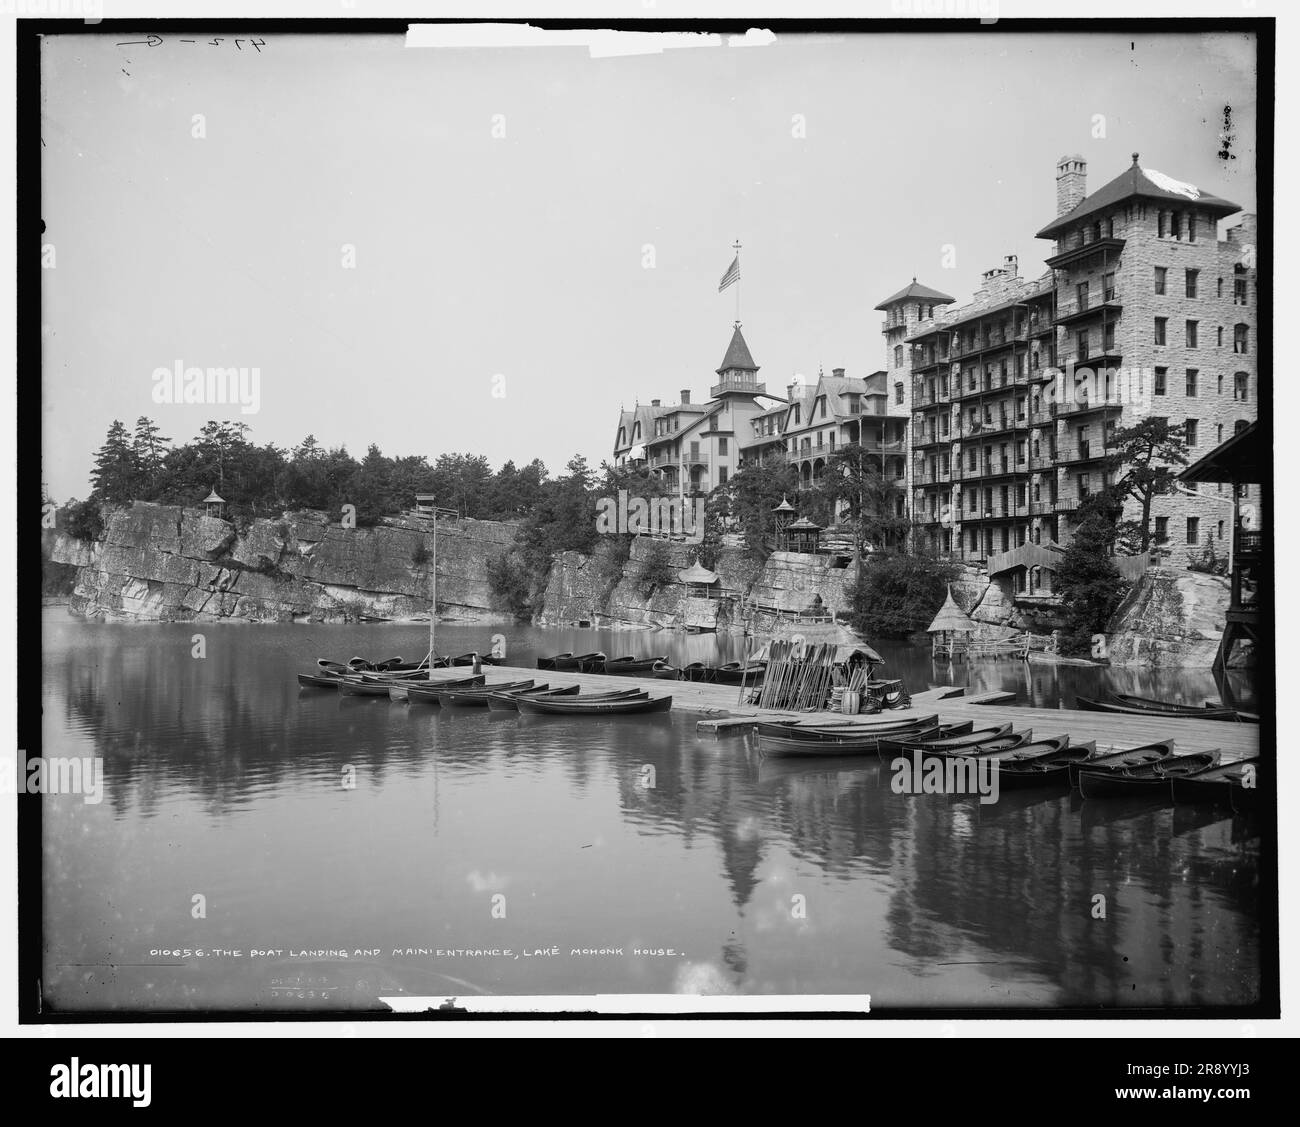 The Boat landing and main entrance, Lake Mohonk House, c1902 Stock ...